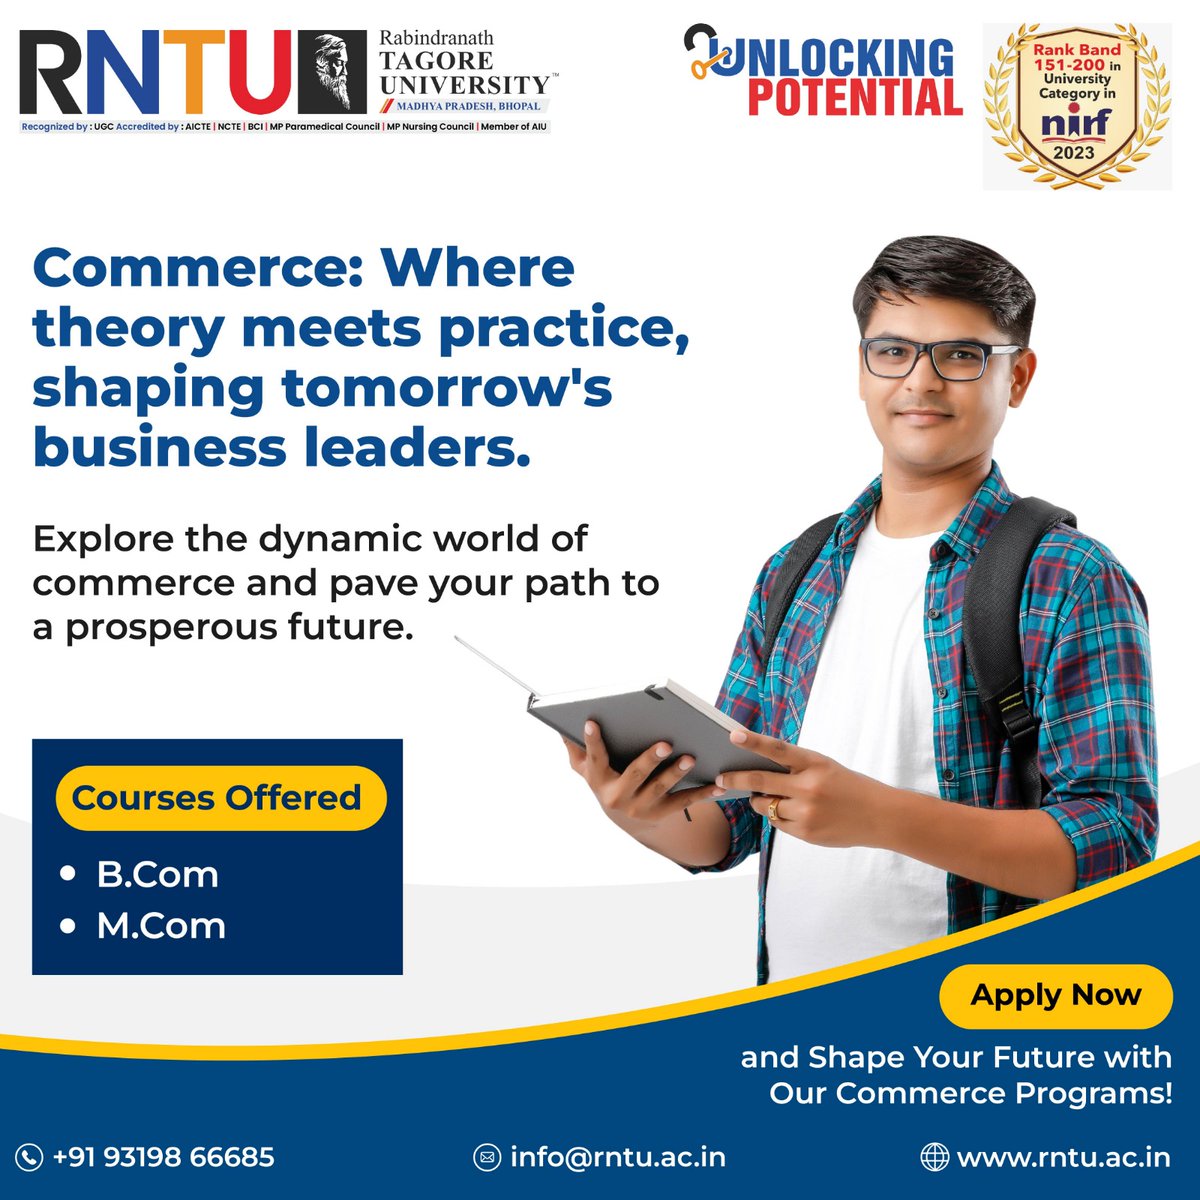 Shape your future in commerce with our B.Com and M.Com programs. Apply now!

#CommerceEducation #BCom #MCom #ApplyNow #ShapeYourFuture #RNTU